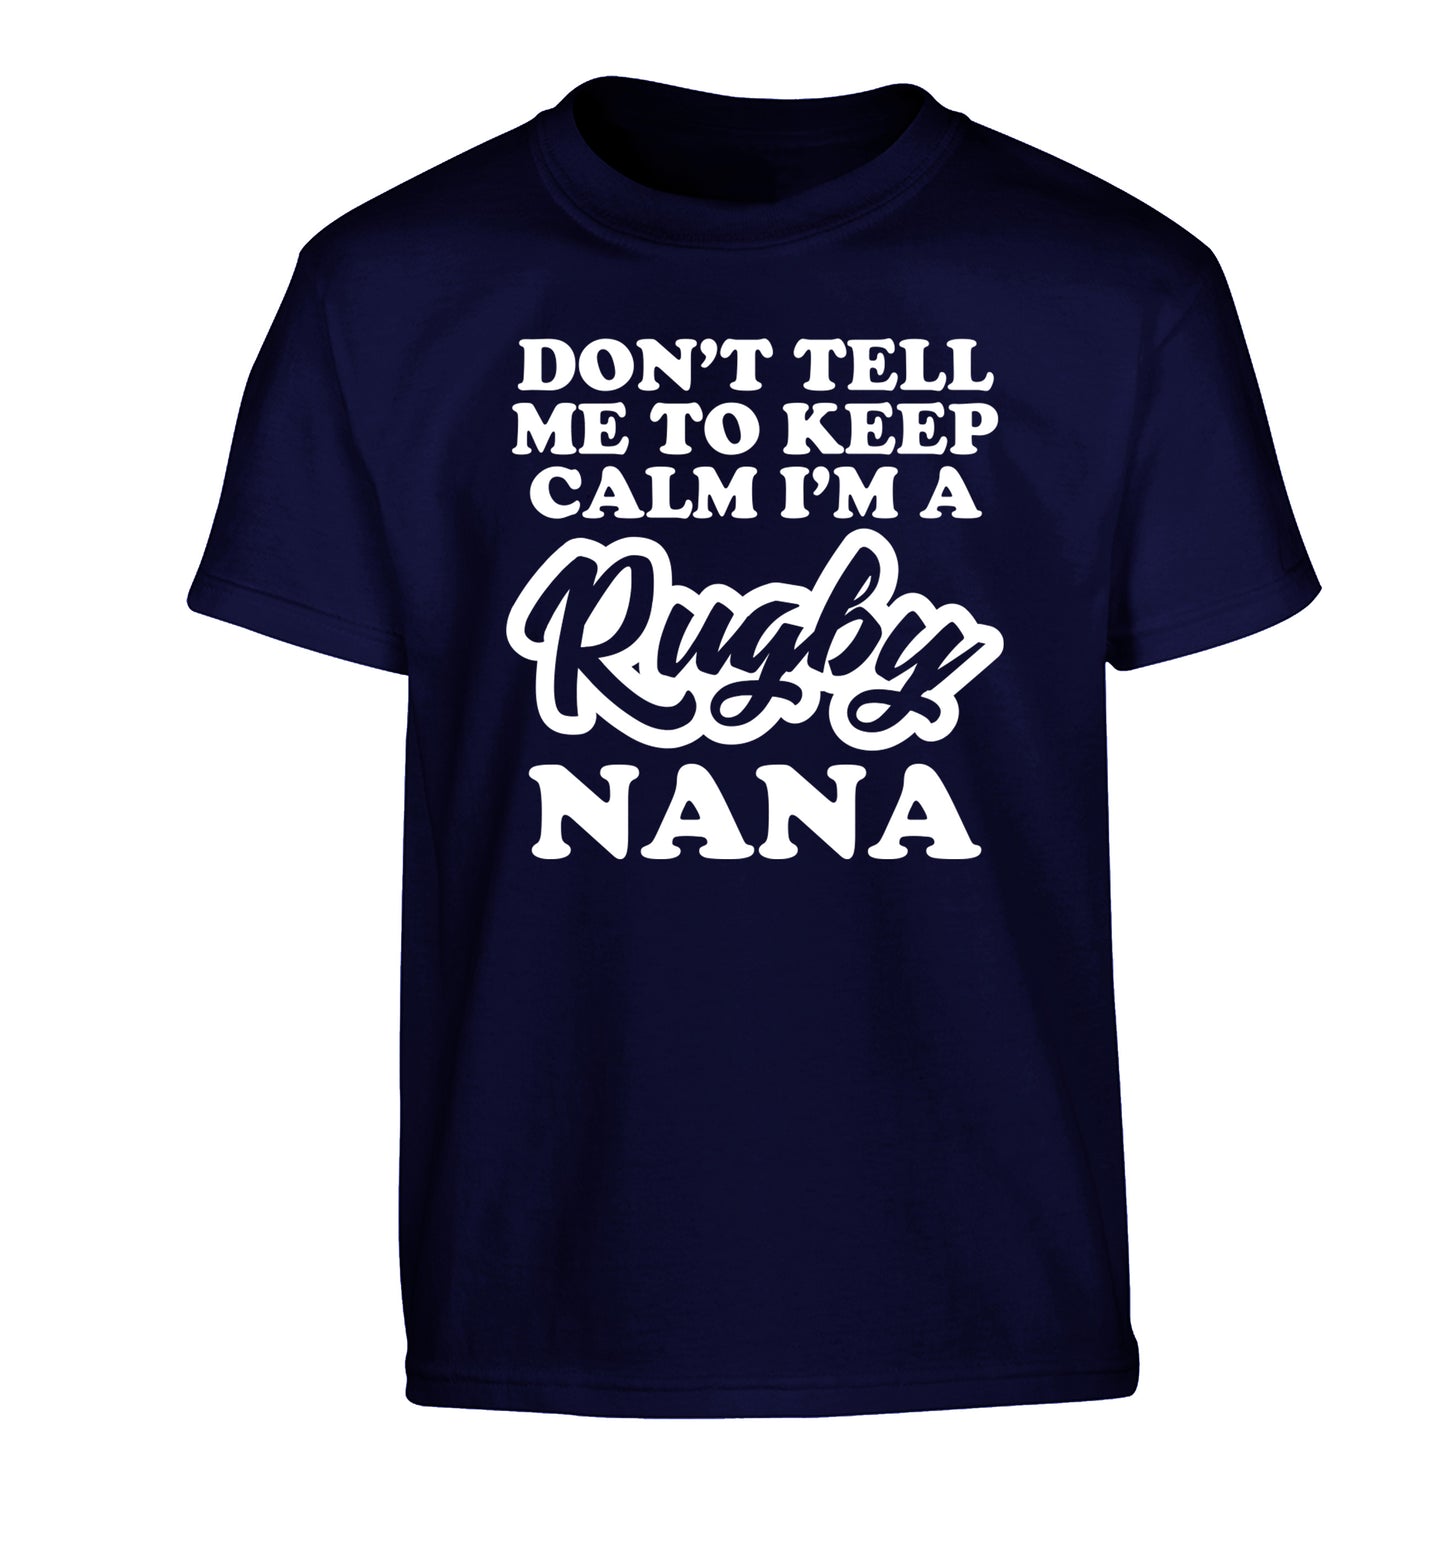 Don't tell me to keep calm I'm a rugby nana Children's navy Tshirt 12-13 Years